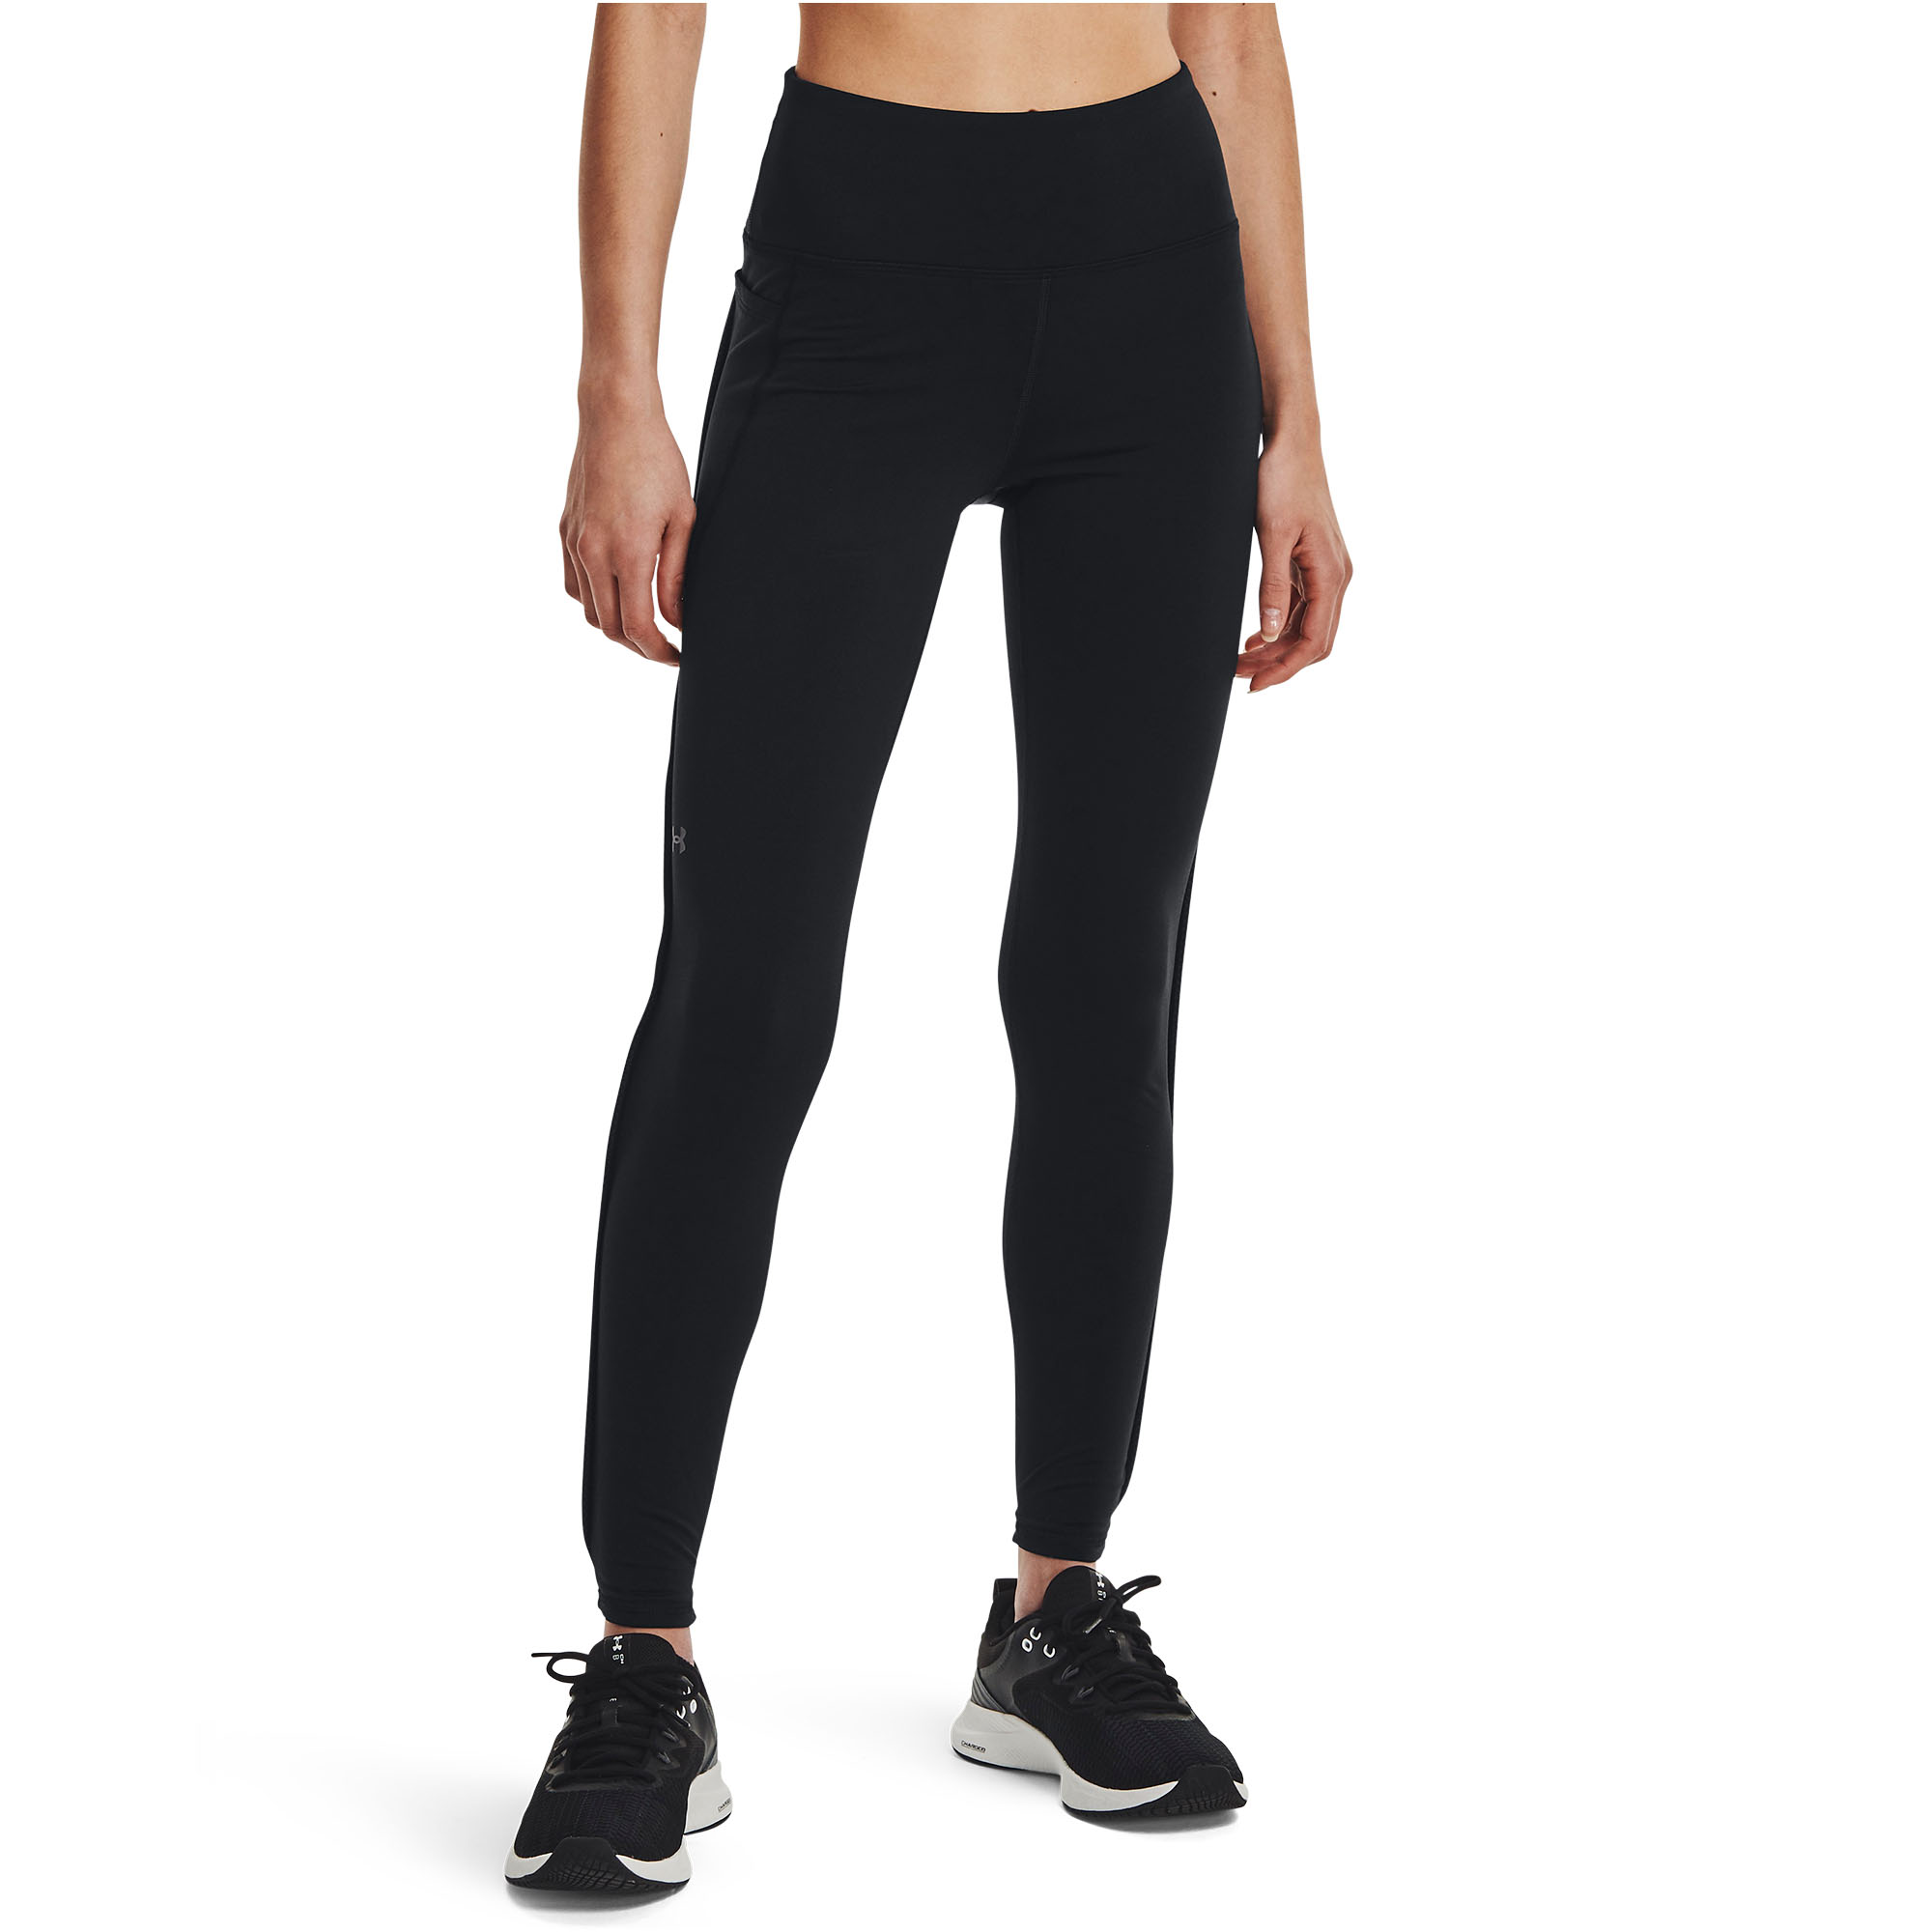 Under Armour, Pants & Jumpsuits, Under Armor Cropped Compression Leggings  Large